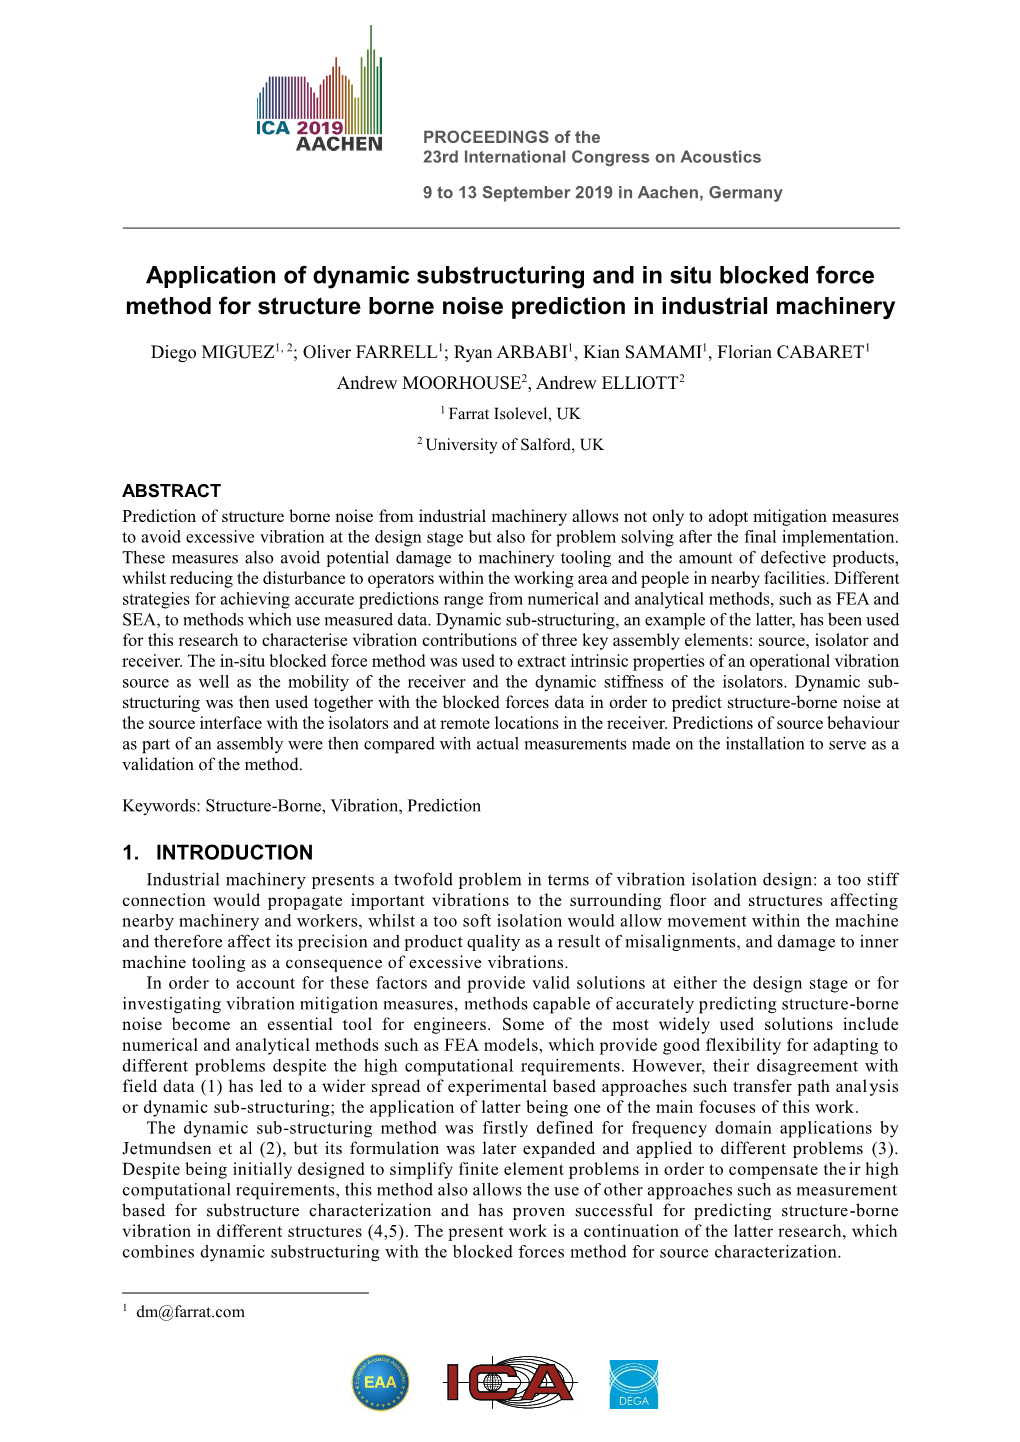 Application of Dynamic Substructuring and in Situ Blocked Force Method for Structure Borne Noise Prediction in Industrial Machinery